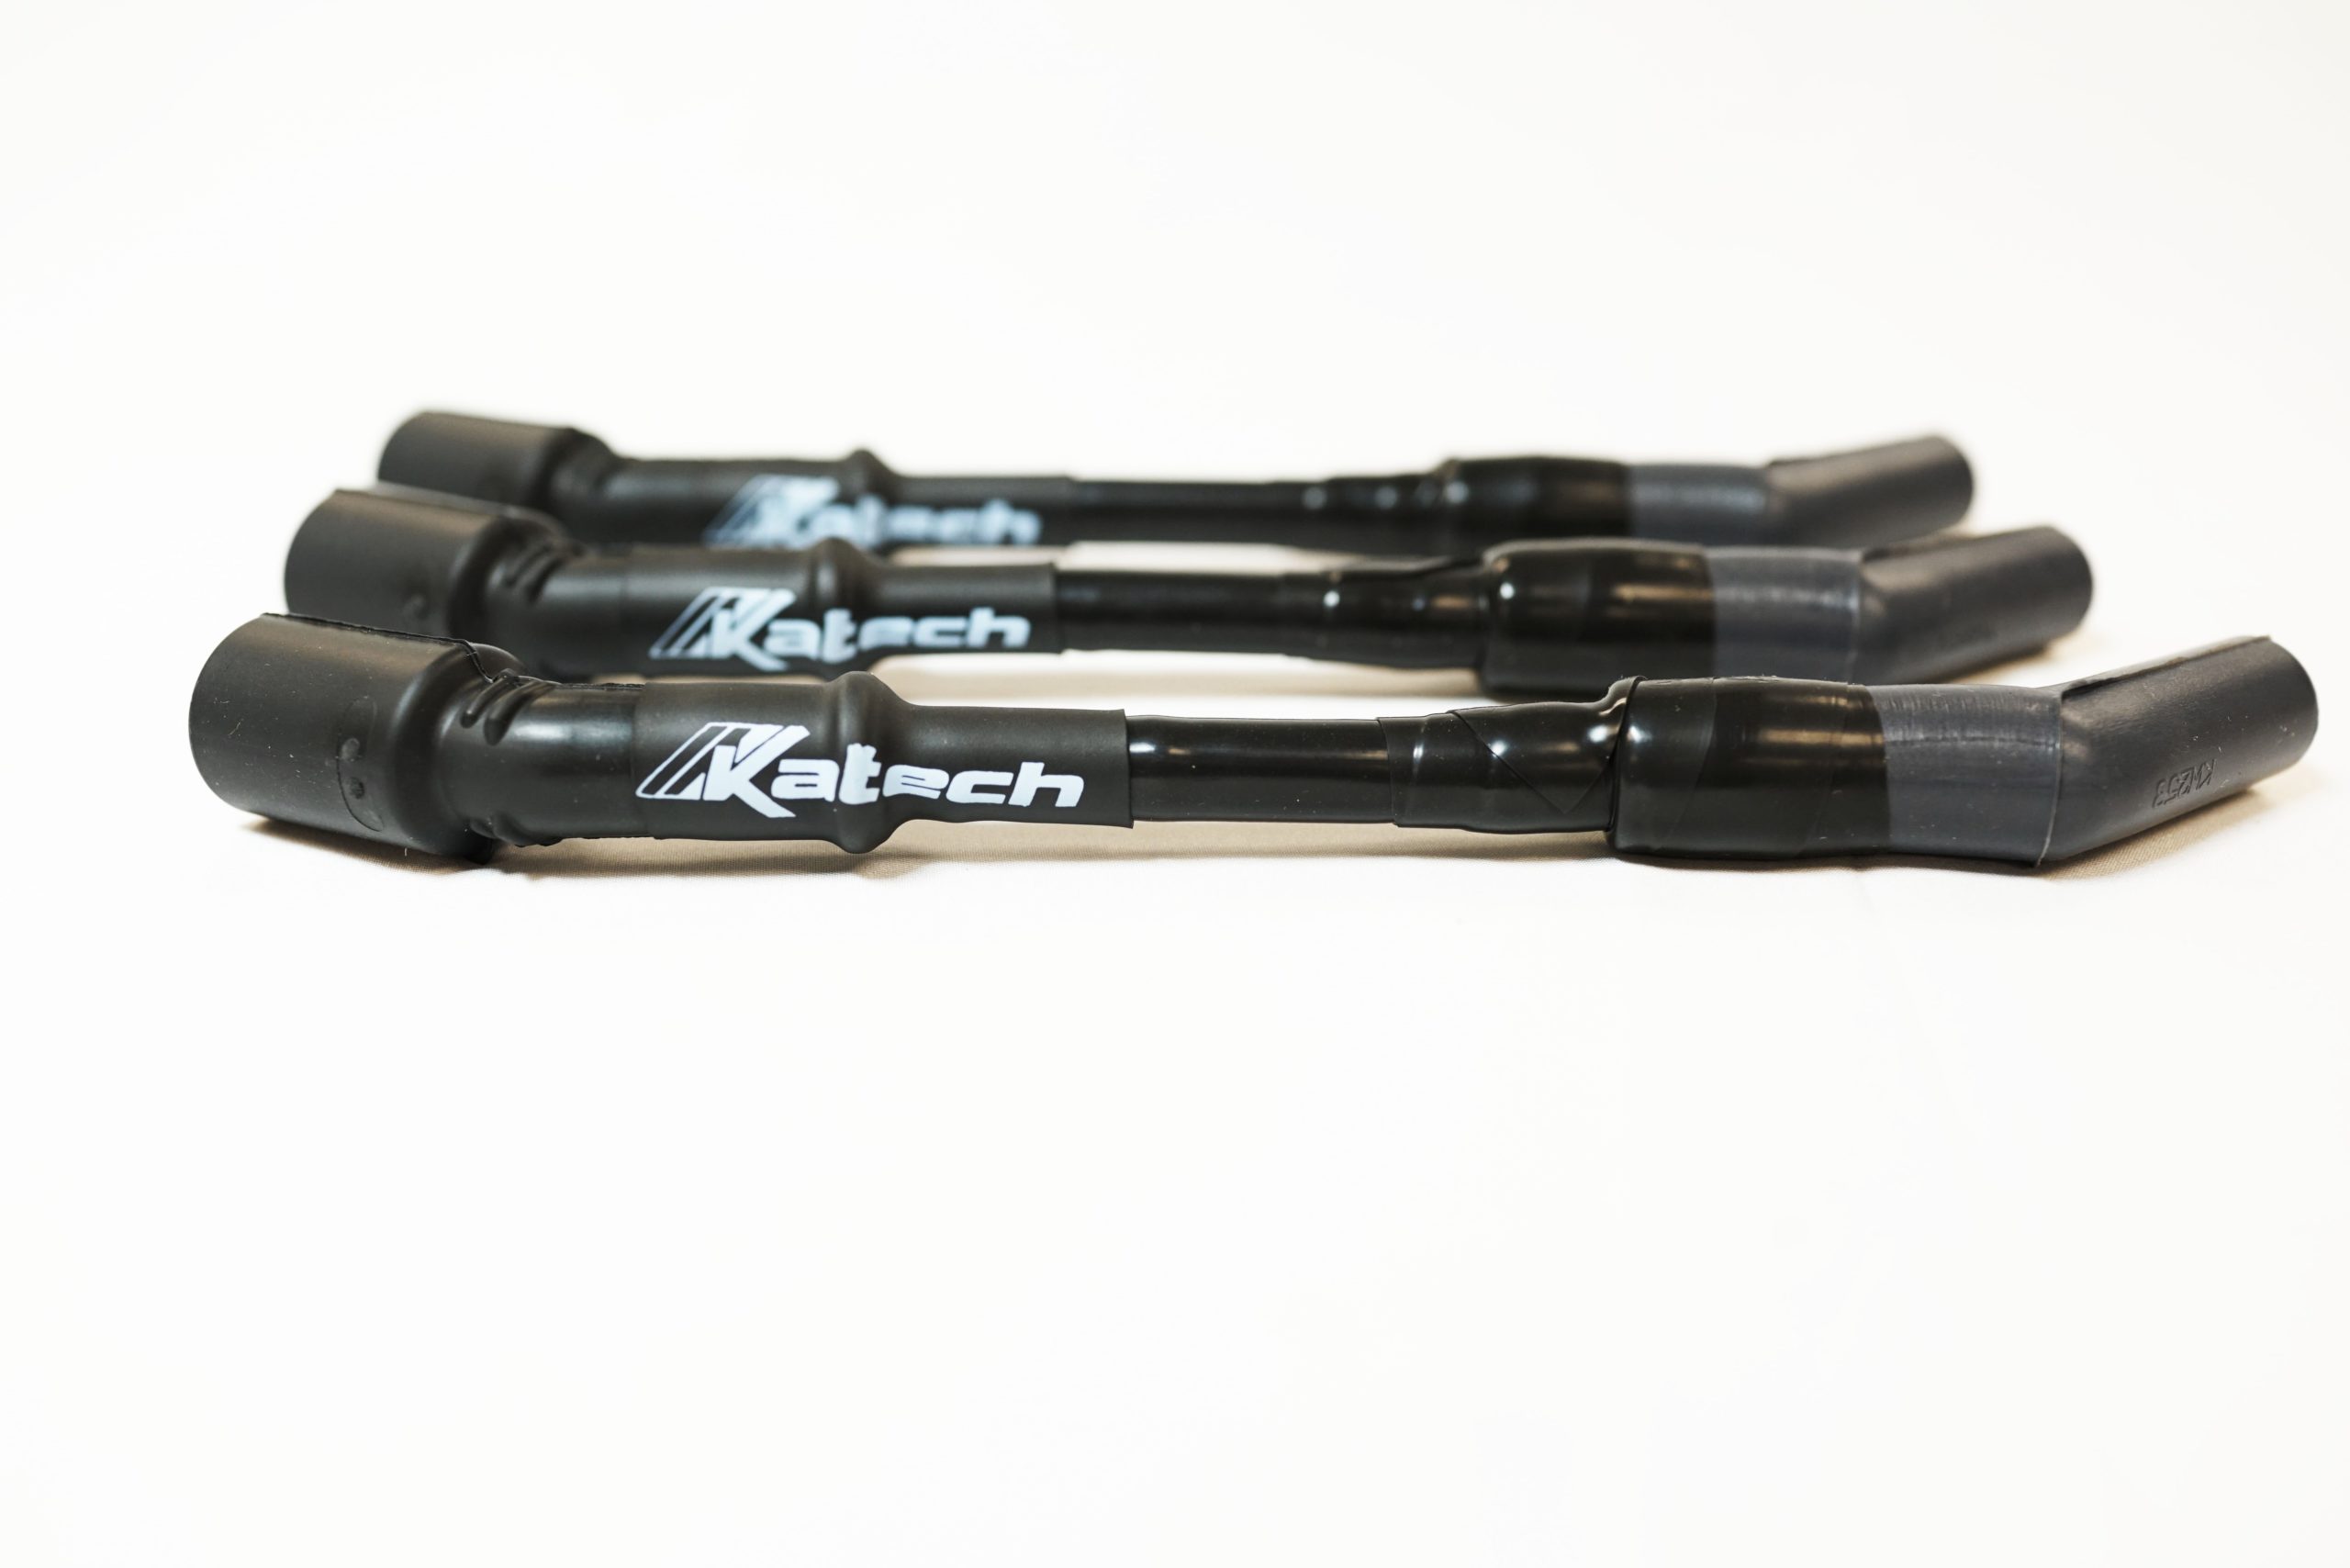 KAT-A6572 Katech Motorsports Spark Plug Wires Wires used by professional racing